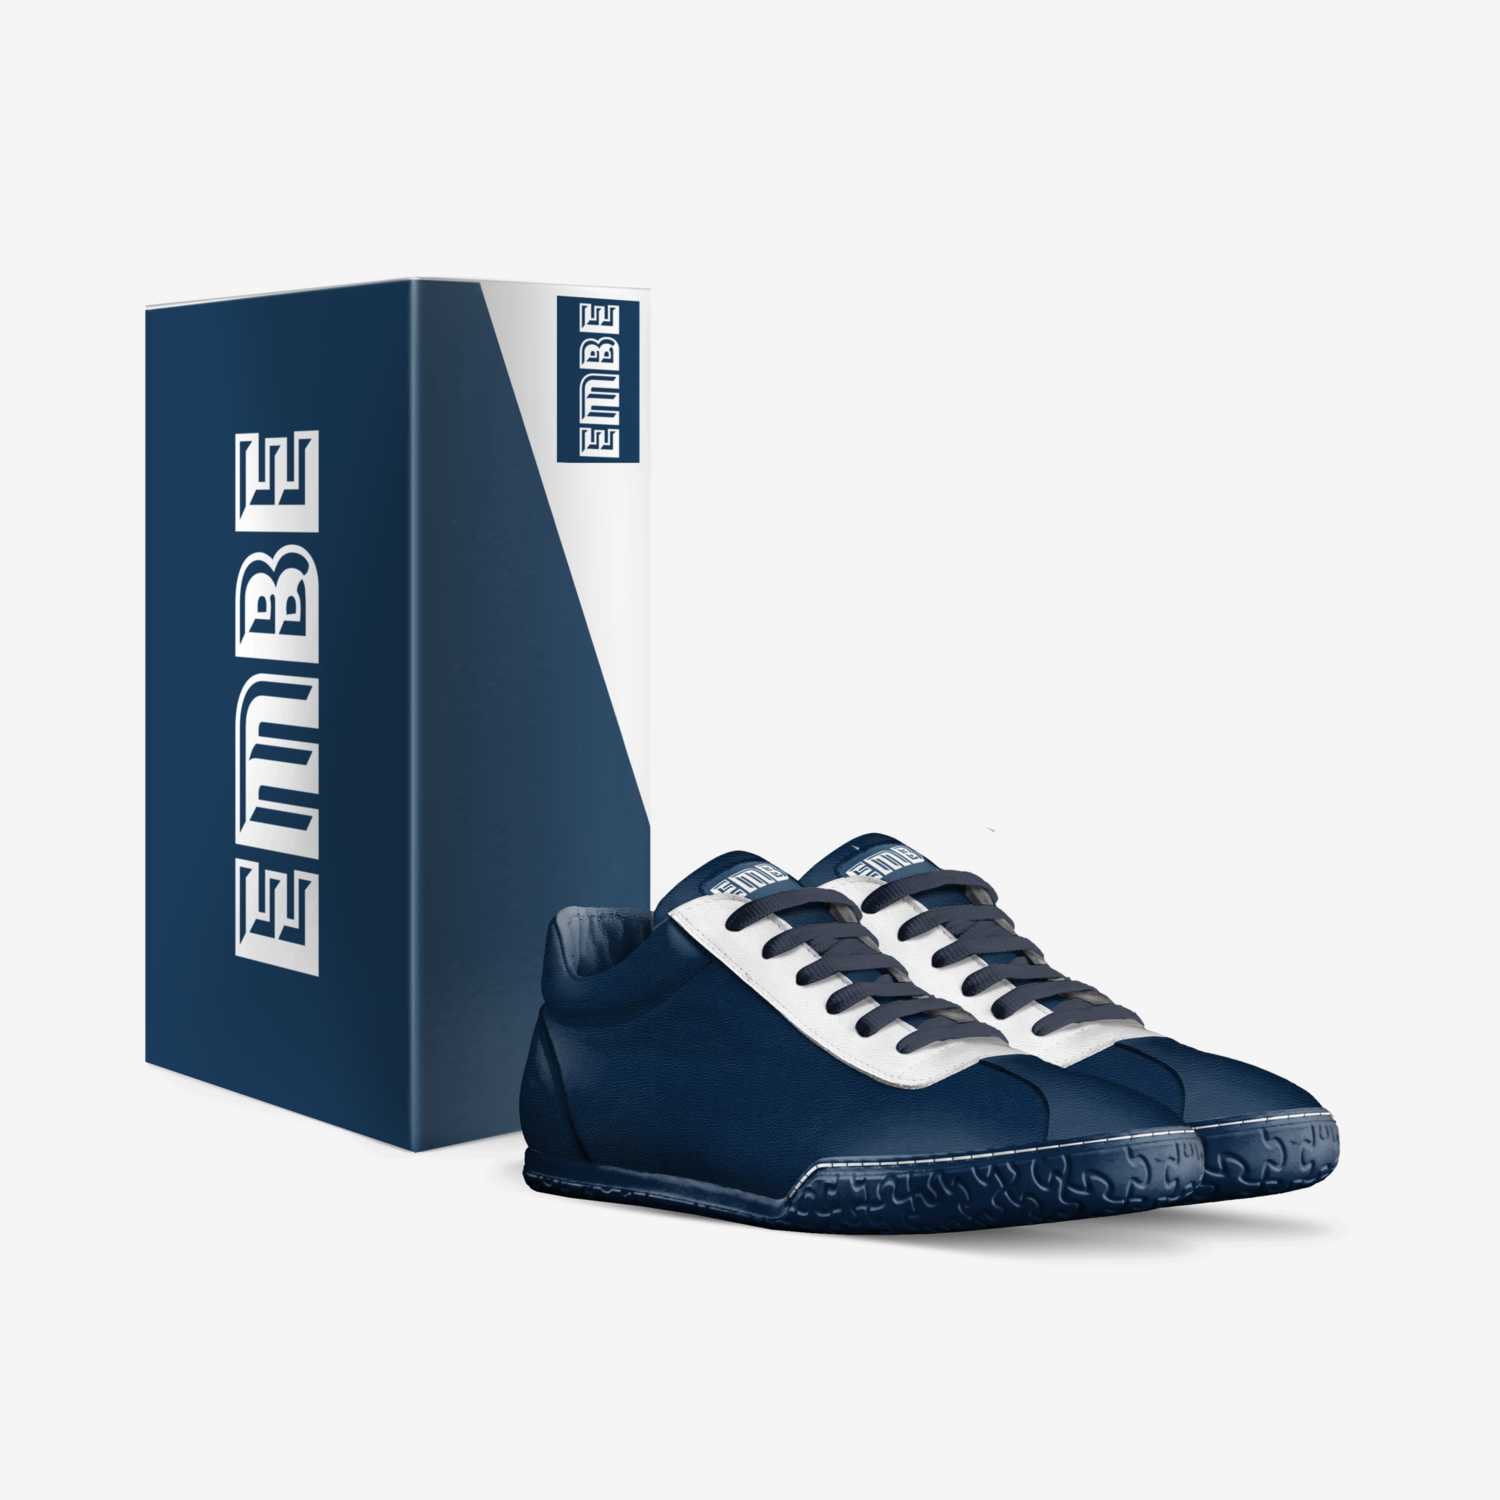 The 1st EMBE custom made in Italy shoes by Mat Bluett | Box view